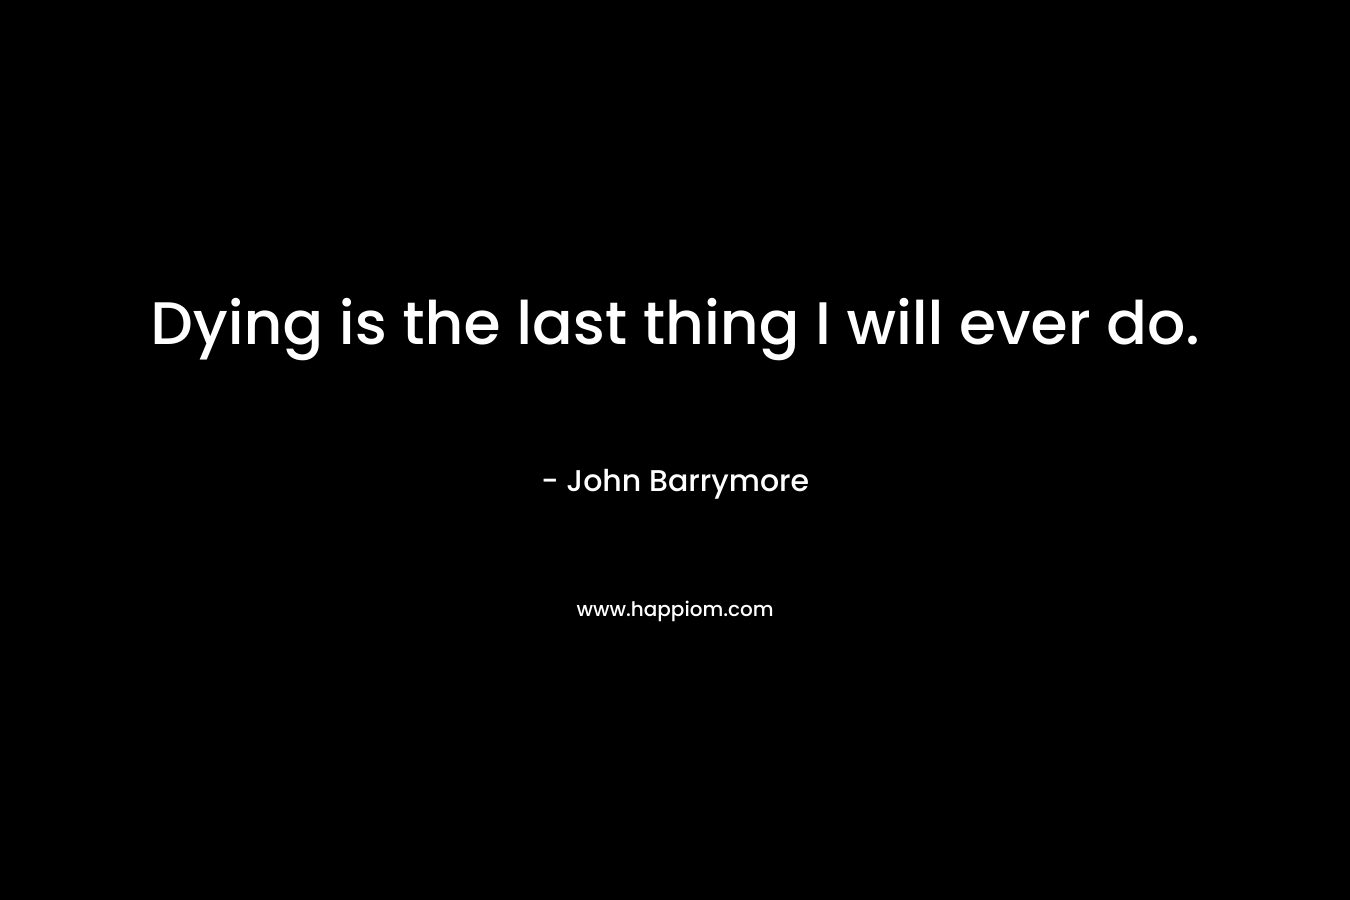 Dying is the last thing I will ever do. – John Barrymore